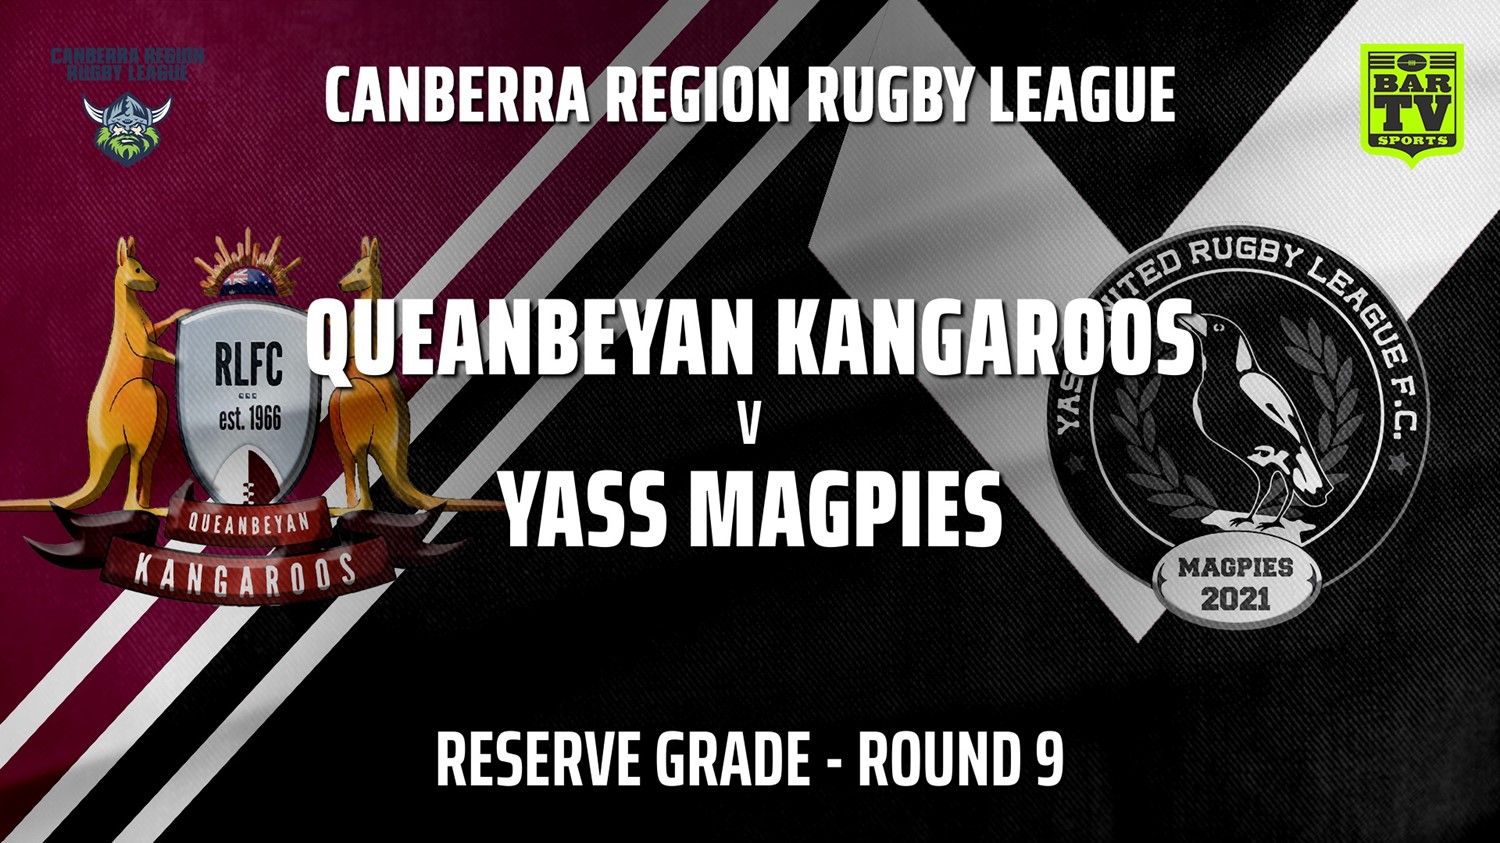 210619-Canberra Round 9 - Reserve Grade - Queanbeyan Kangaroos v Yass Magpies Slate Image